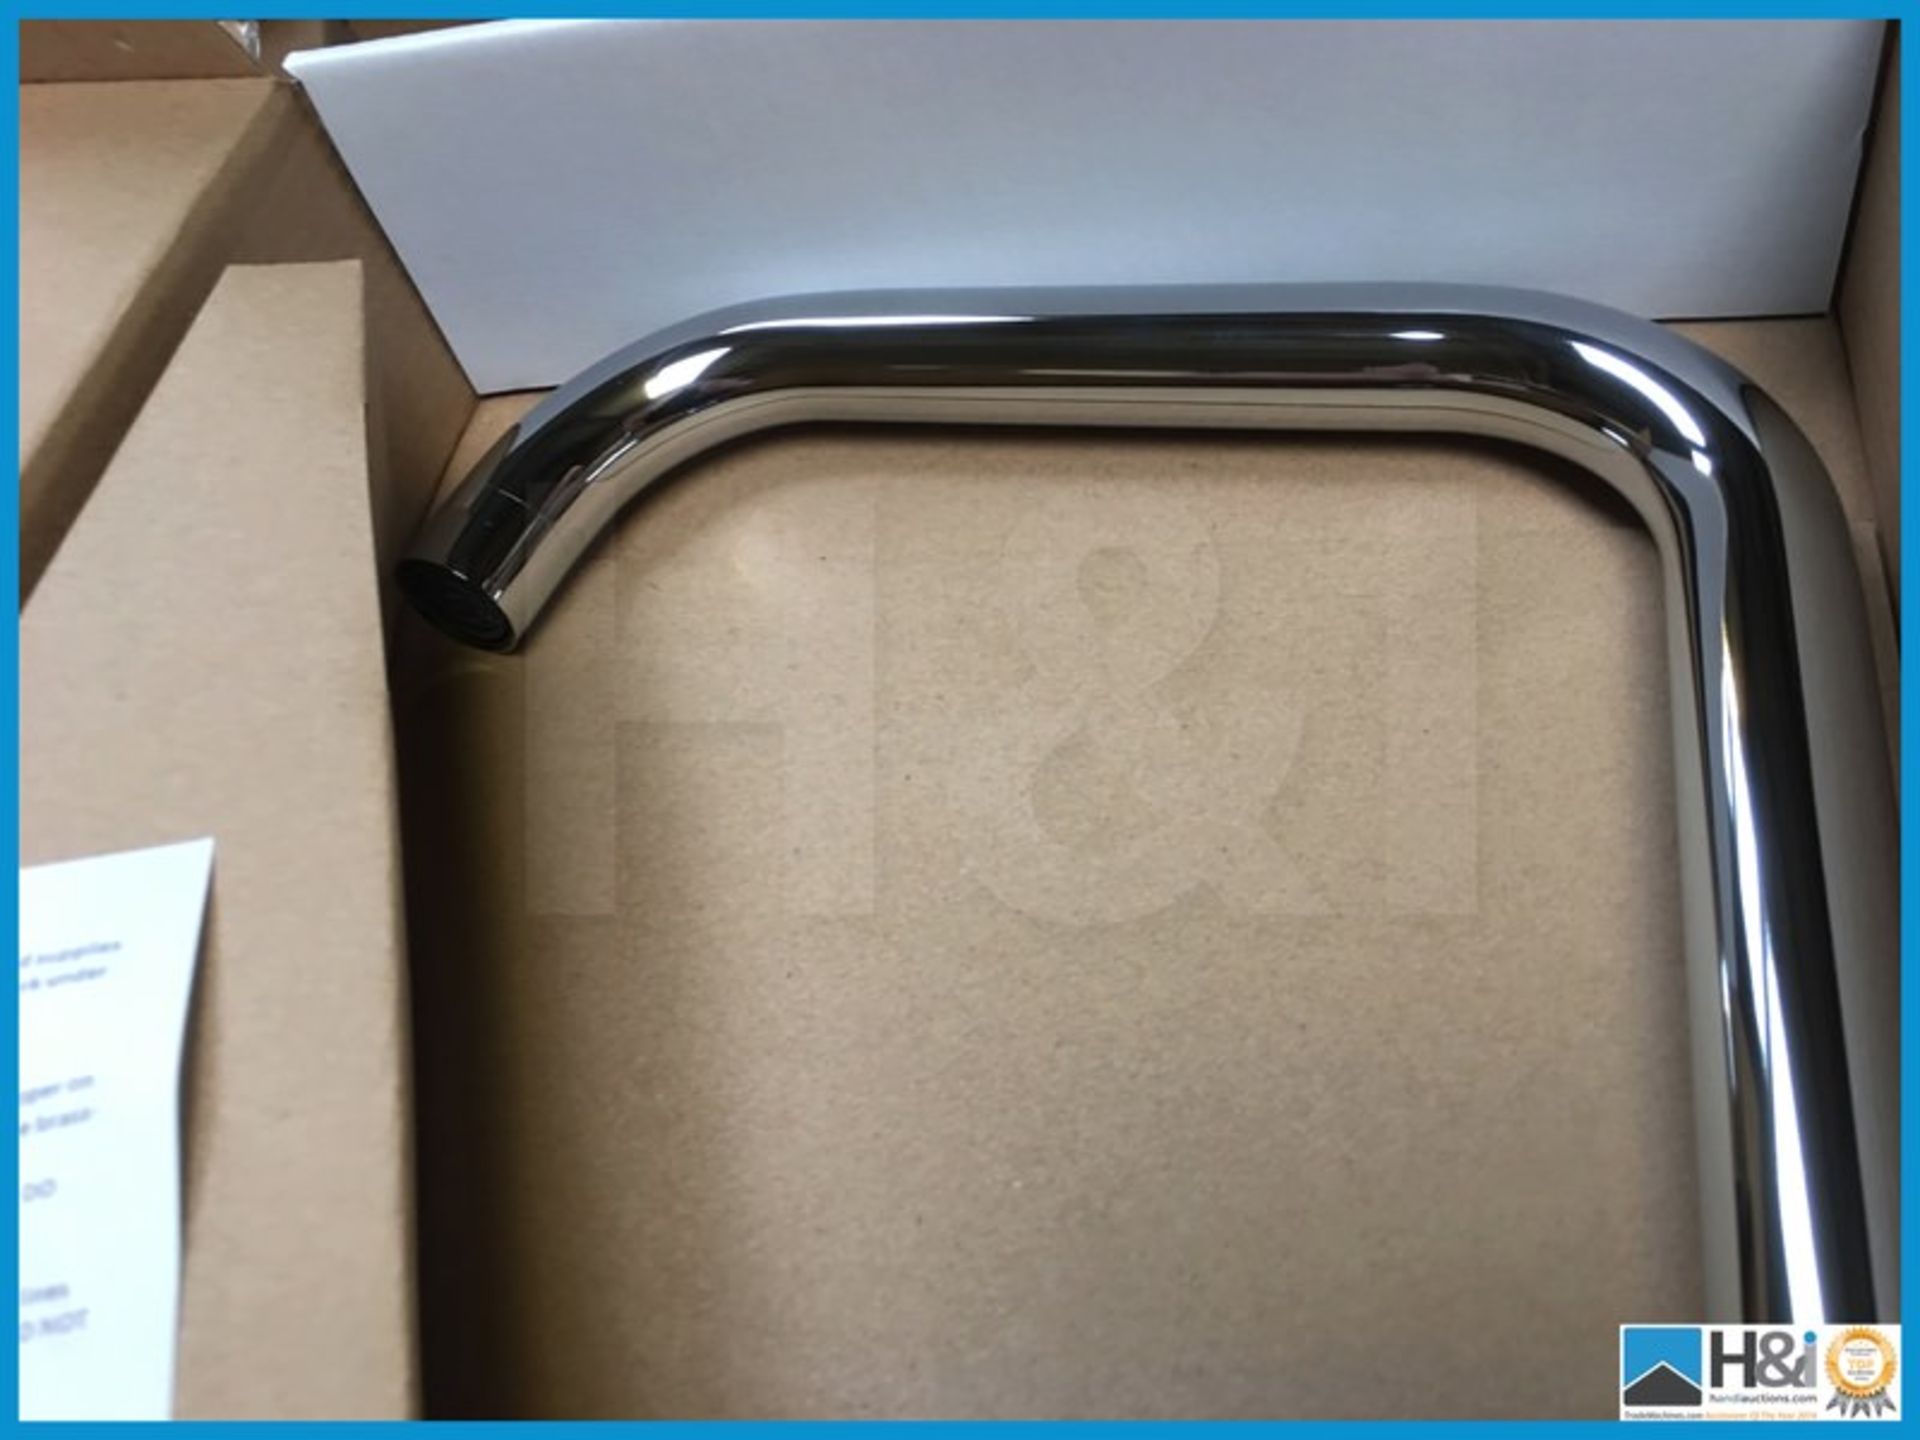 Stunning high quality designer F71 polished chrome mono kitchen mixer tap. New and Boxed. - Image 3 of 5